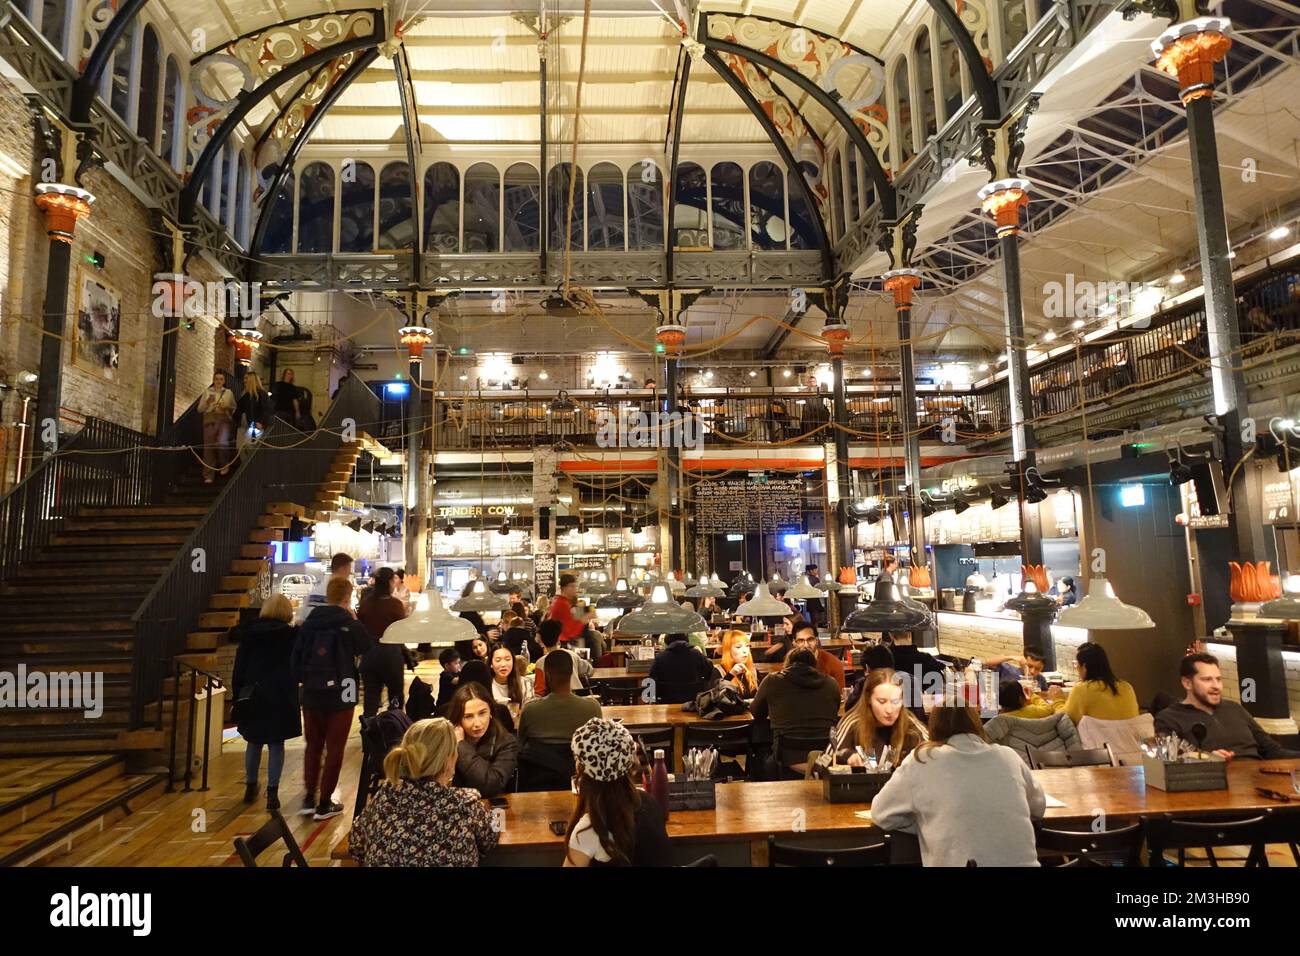 Eating Hall in Manchester Stock Photo